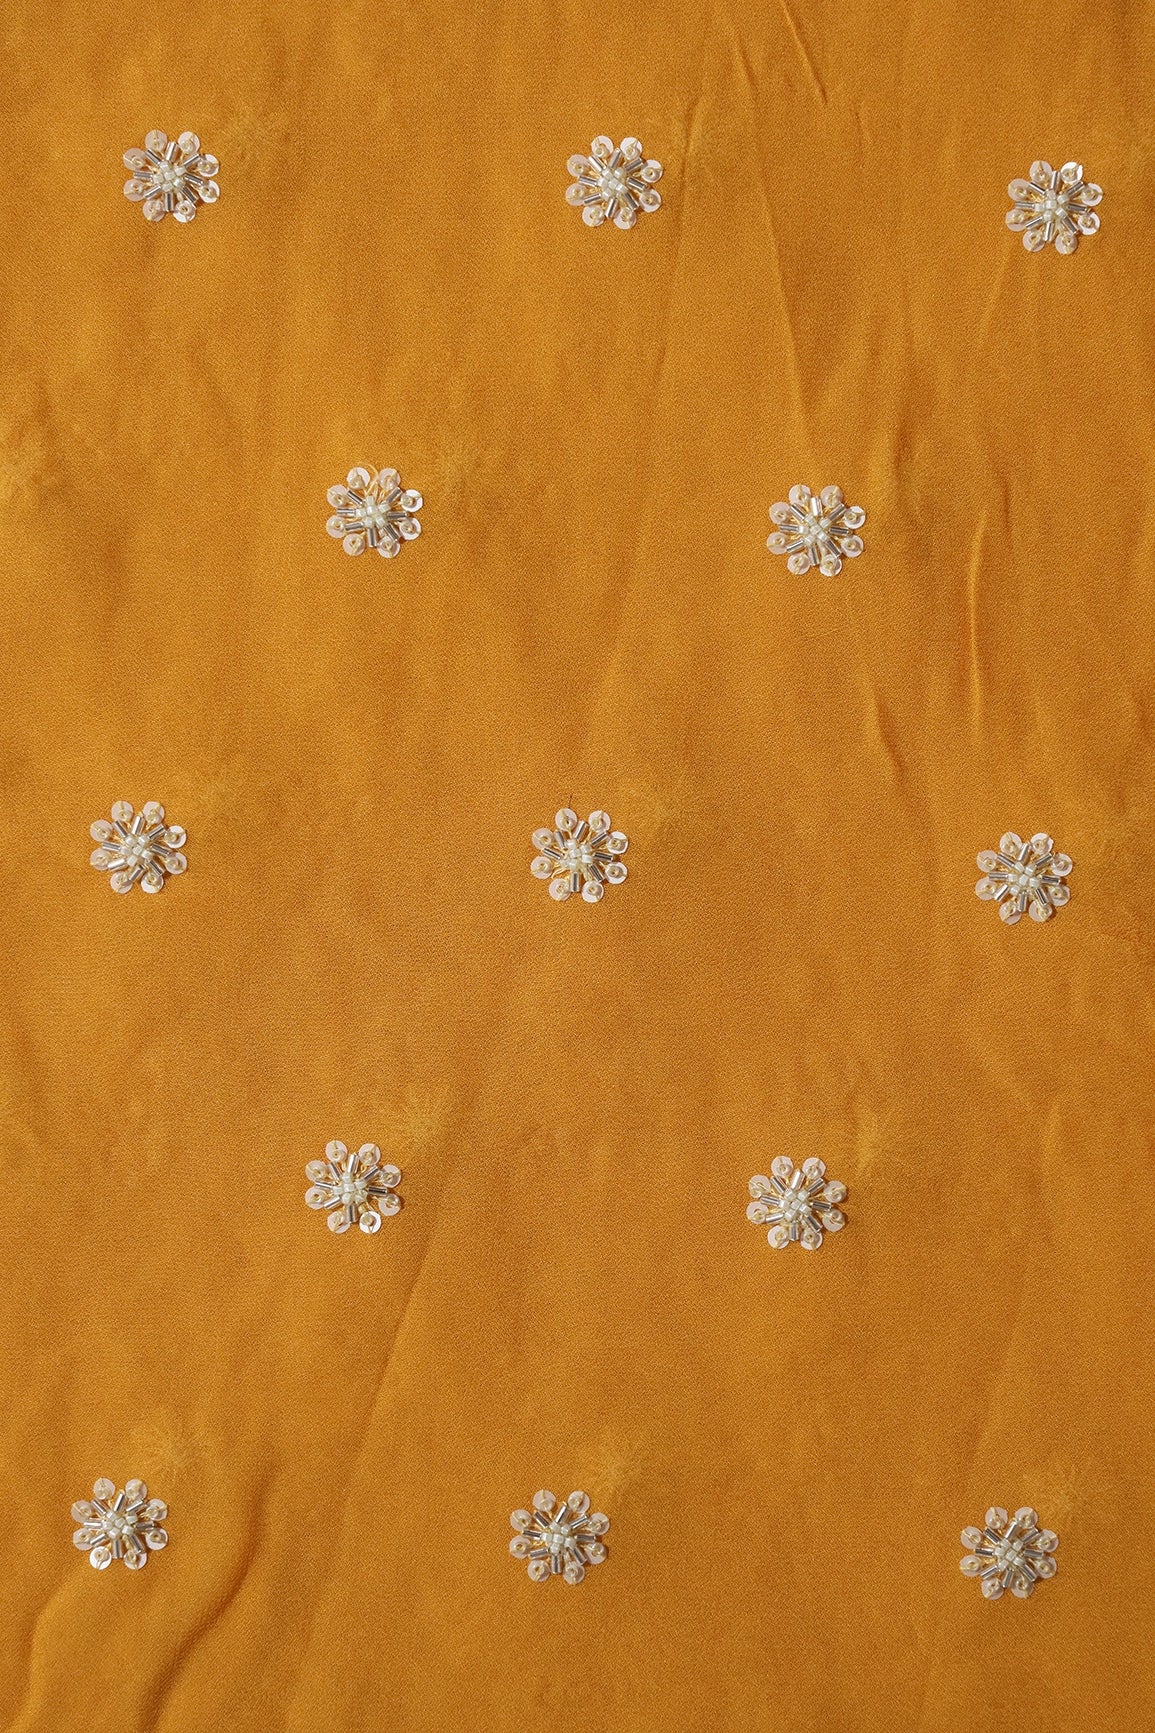 Silver Beads With Sequins Small Floral Handwork Embroidery On Yellow Viscose Georgette Fabric